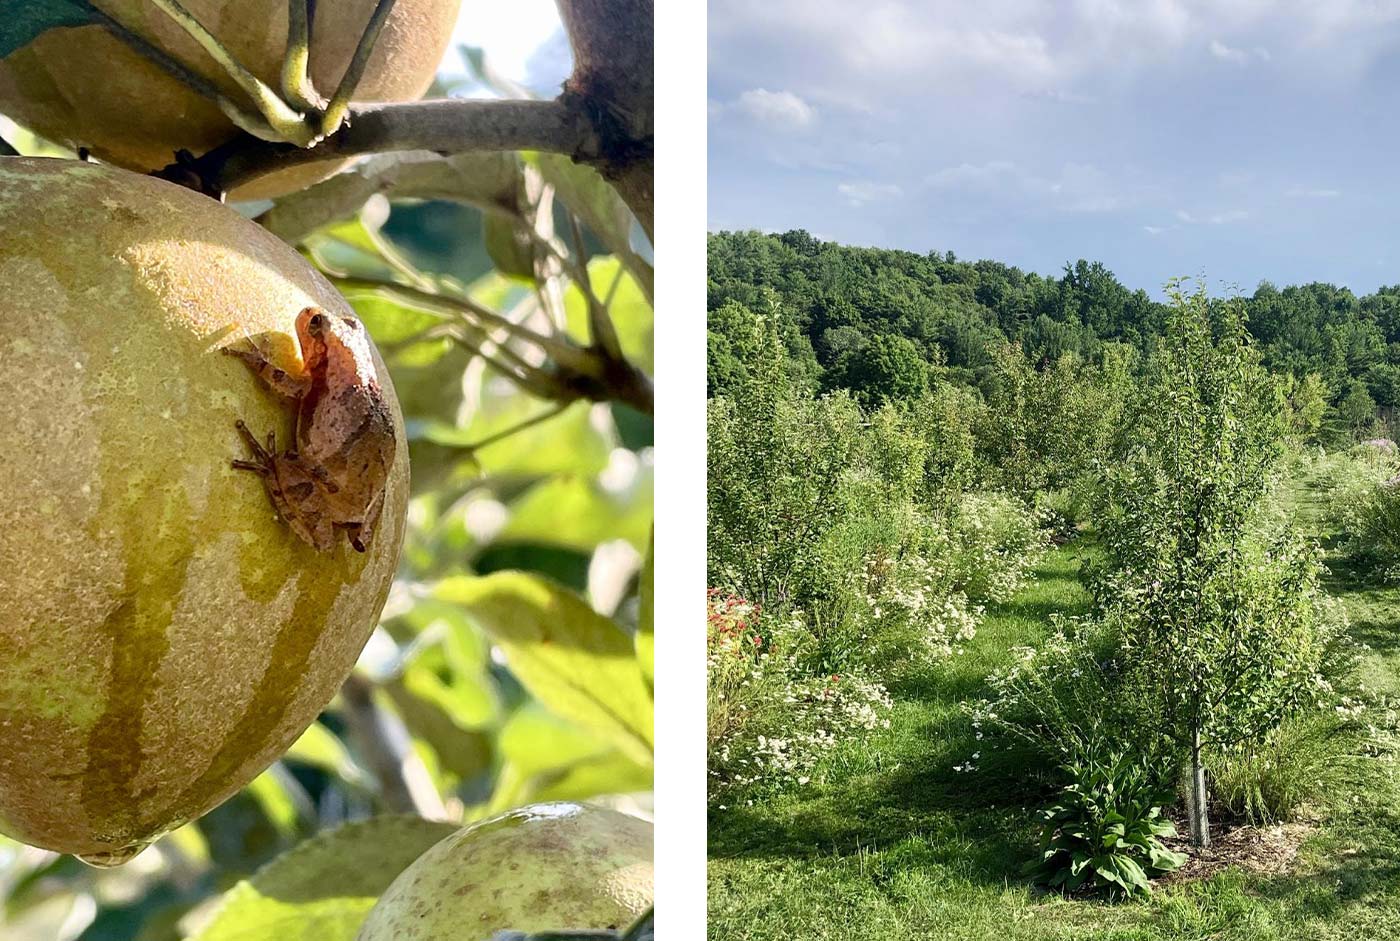 Agroforestry is the integration of trees and shrubs into crop and animal farming systems helps to create environmental, economic, and social benefits